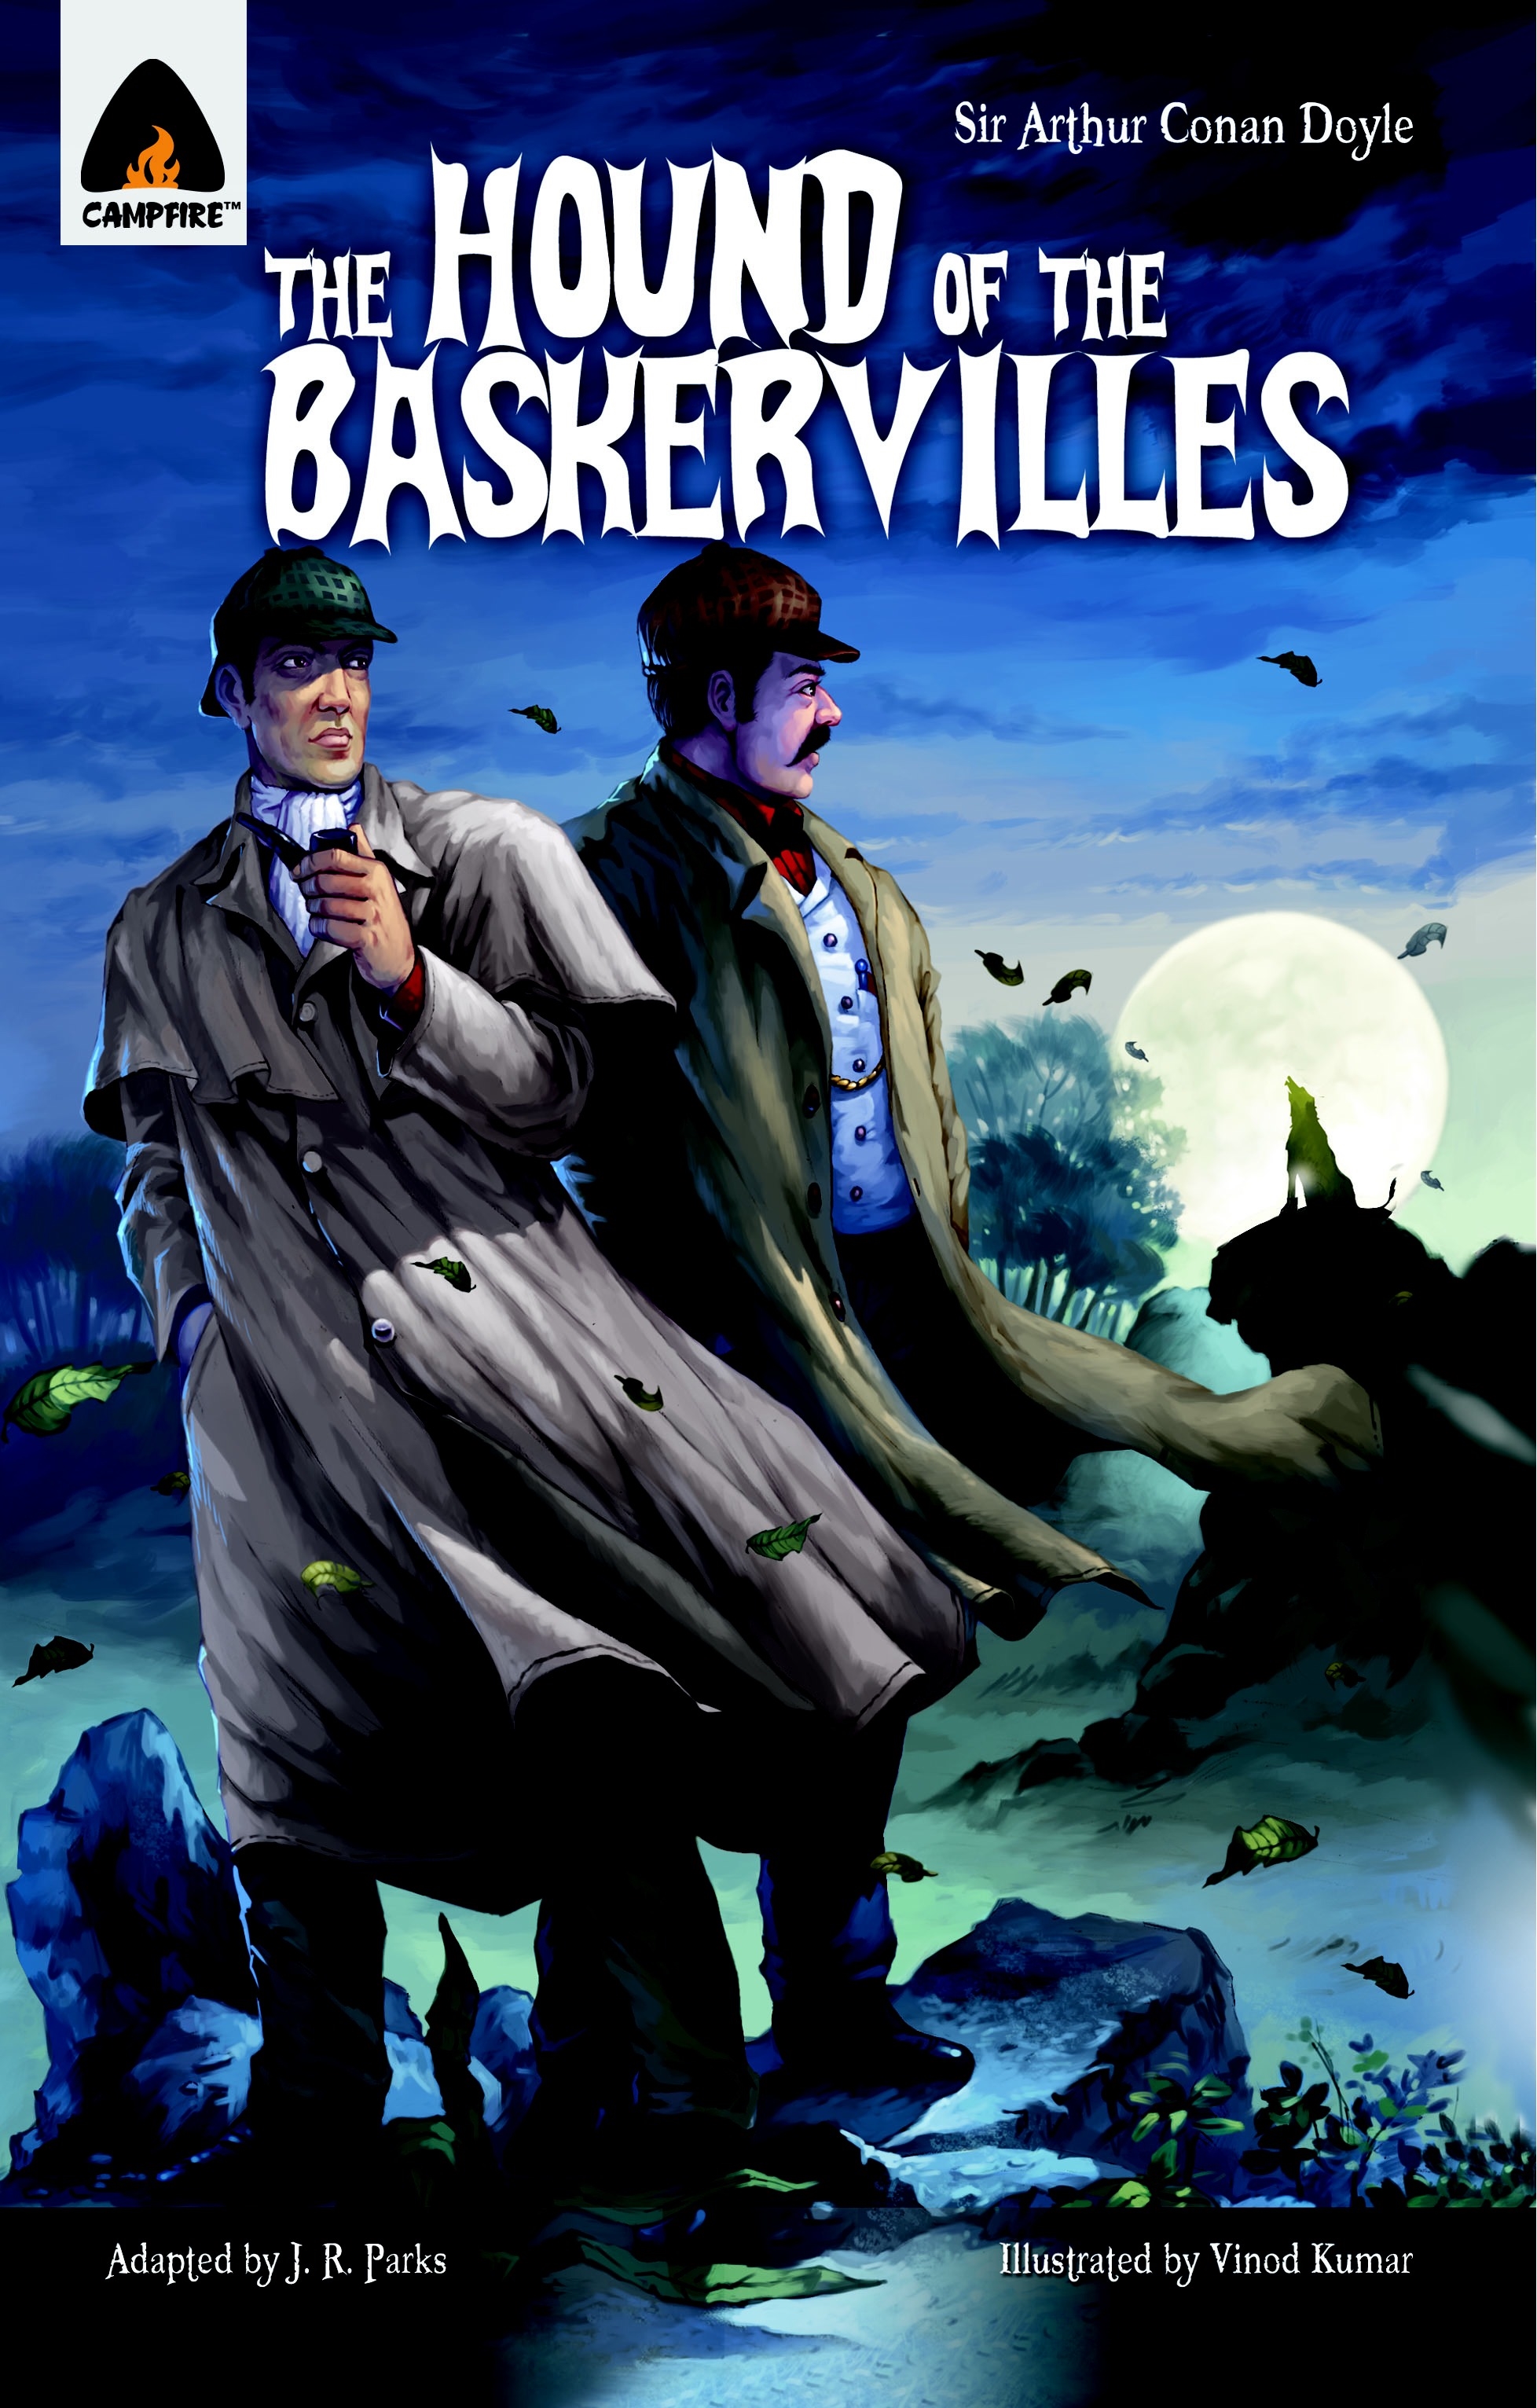 book review the hound of baskerville